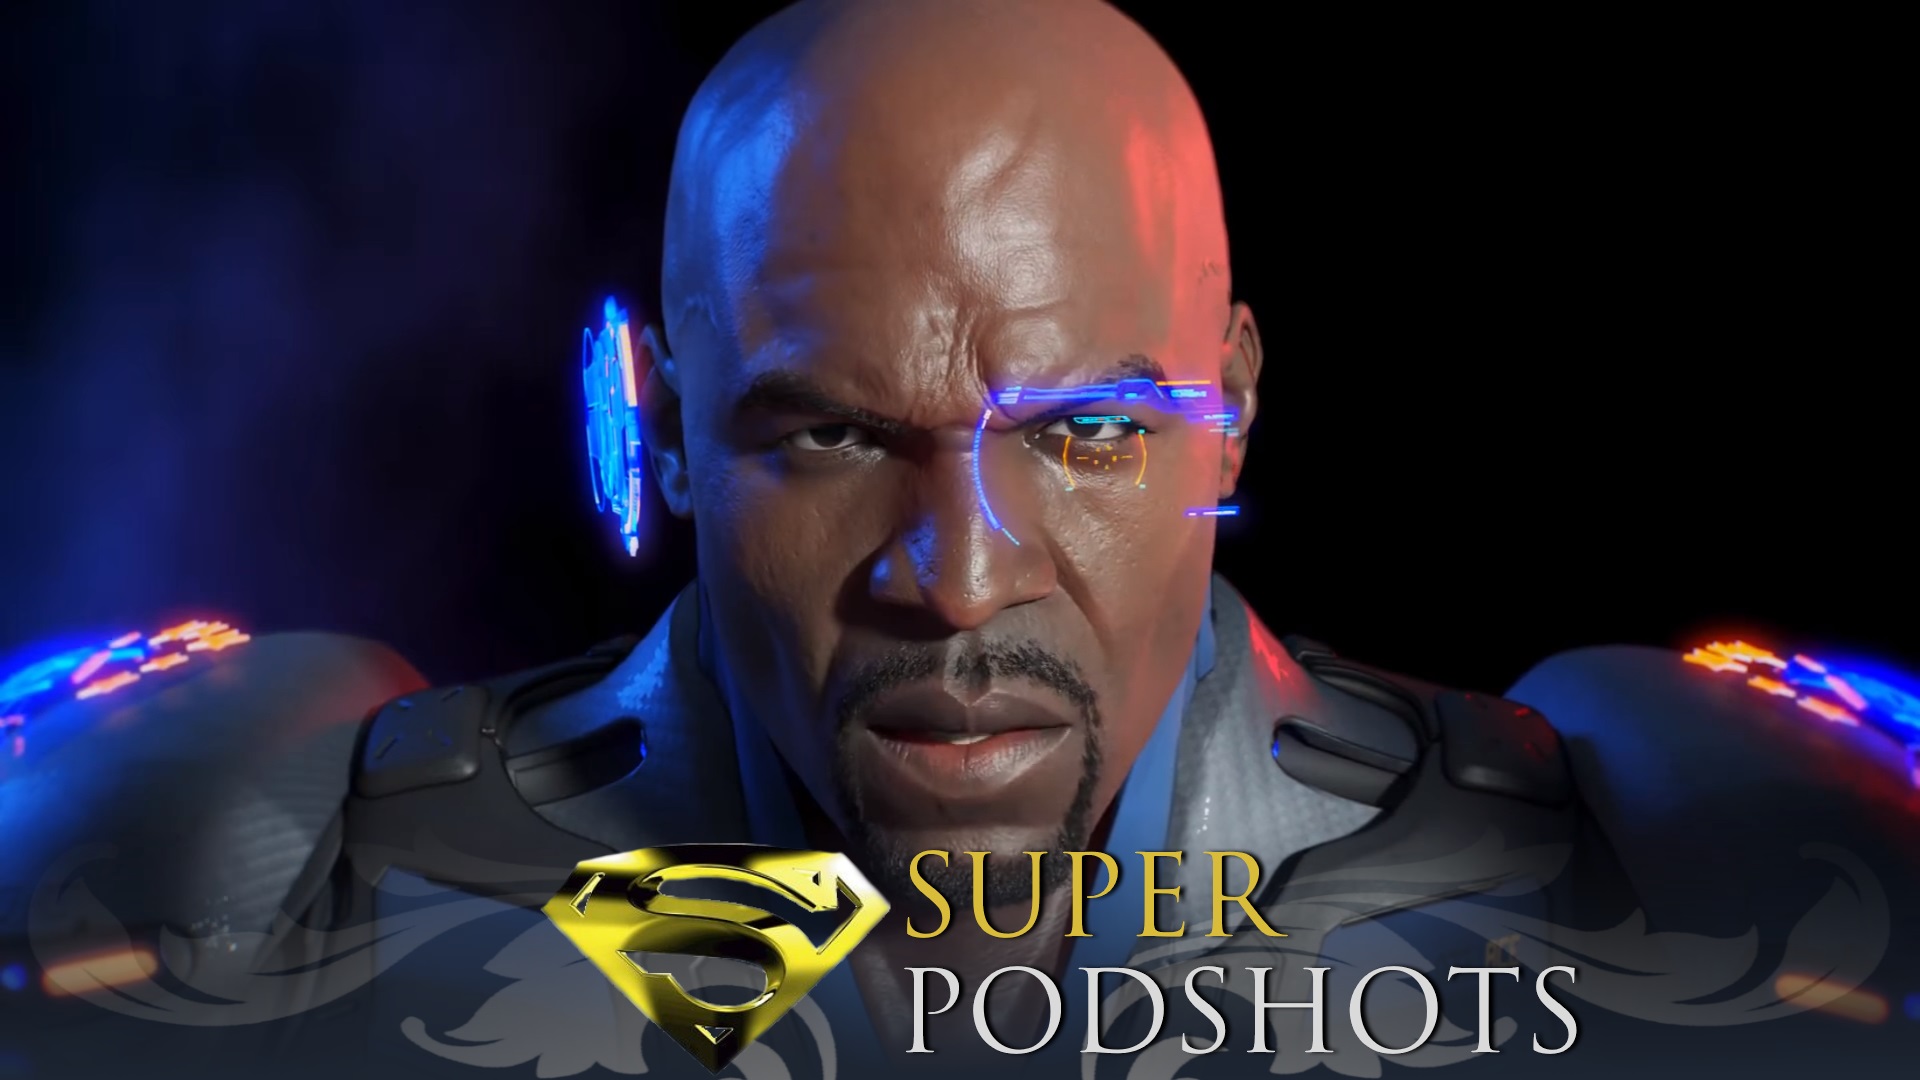 Super Podshots Ep. 76 - Crackdown 3 delayed til 2018 & Xbox One X Doesn't Need Launch Exclusives.